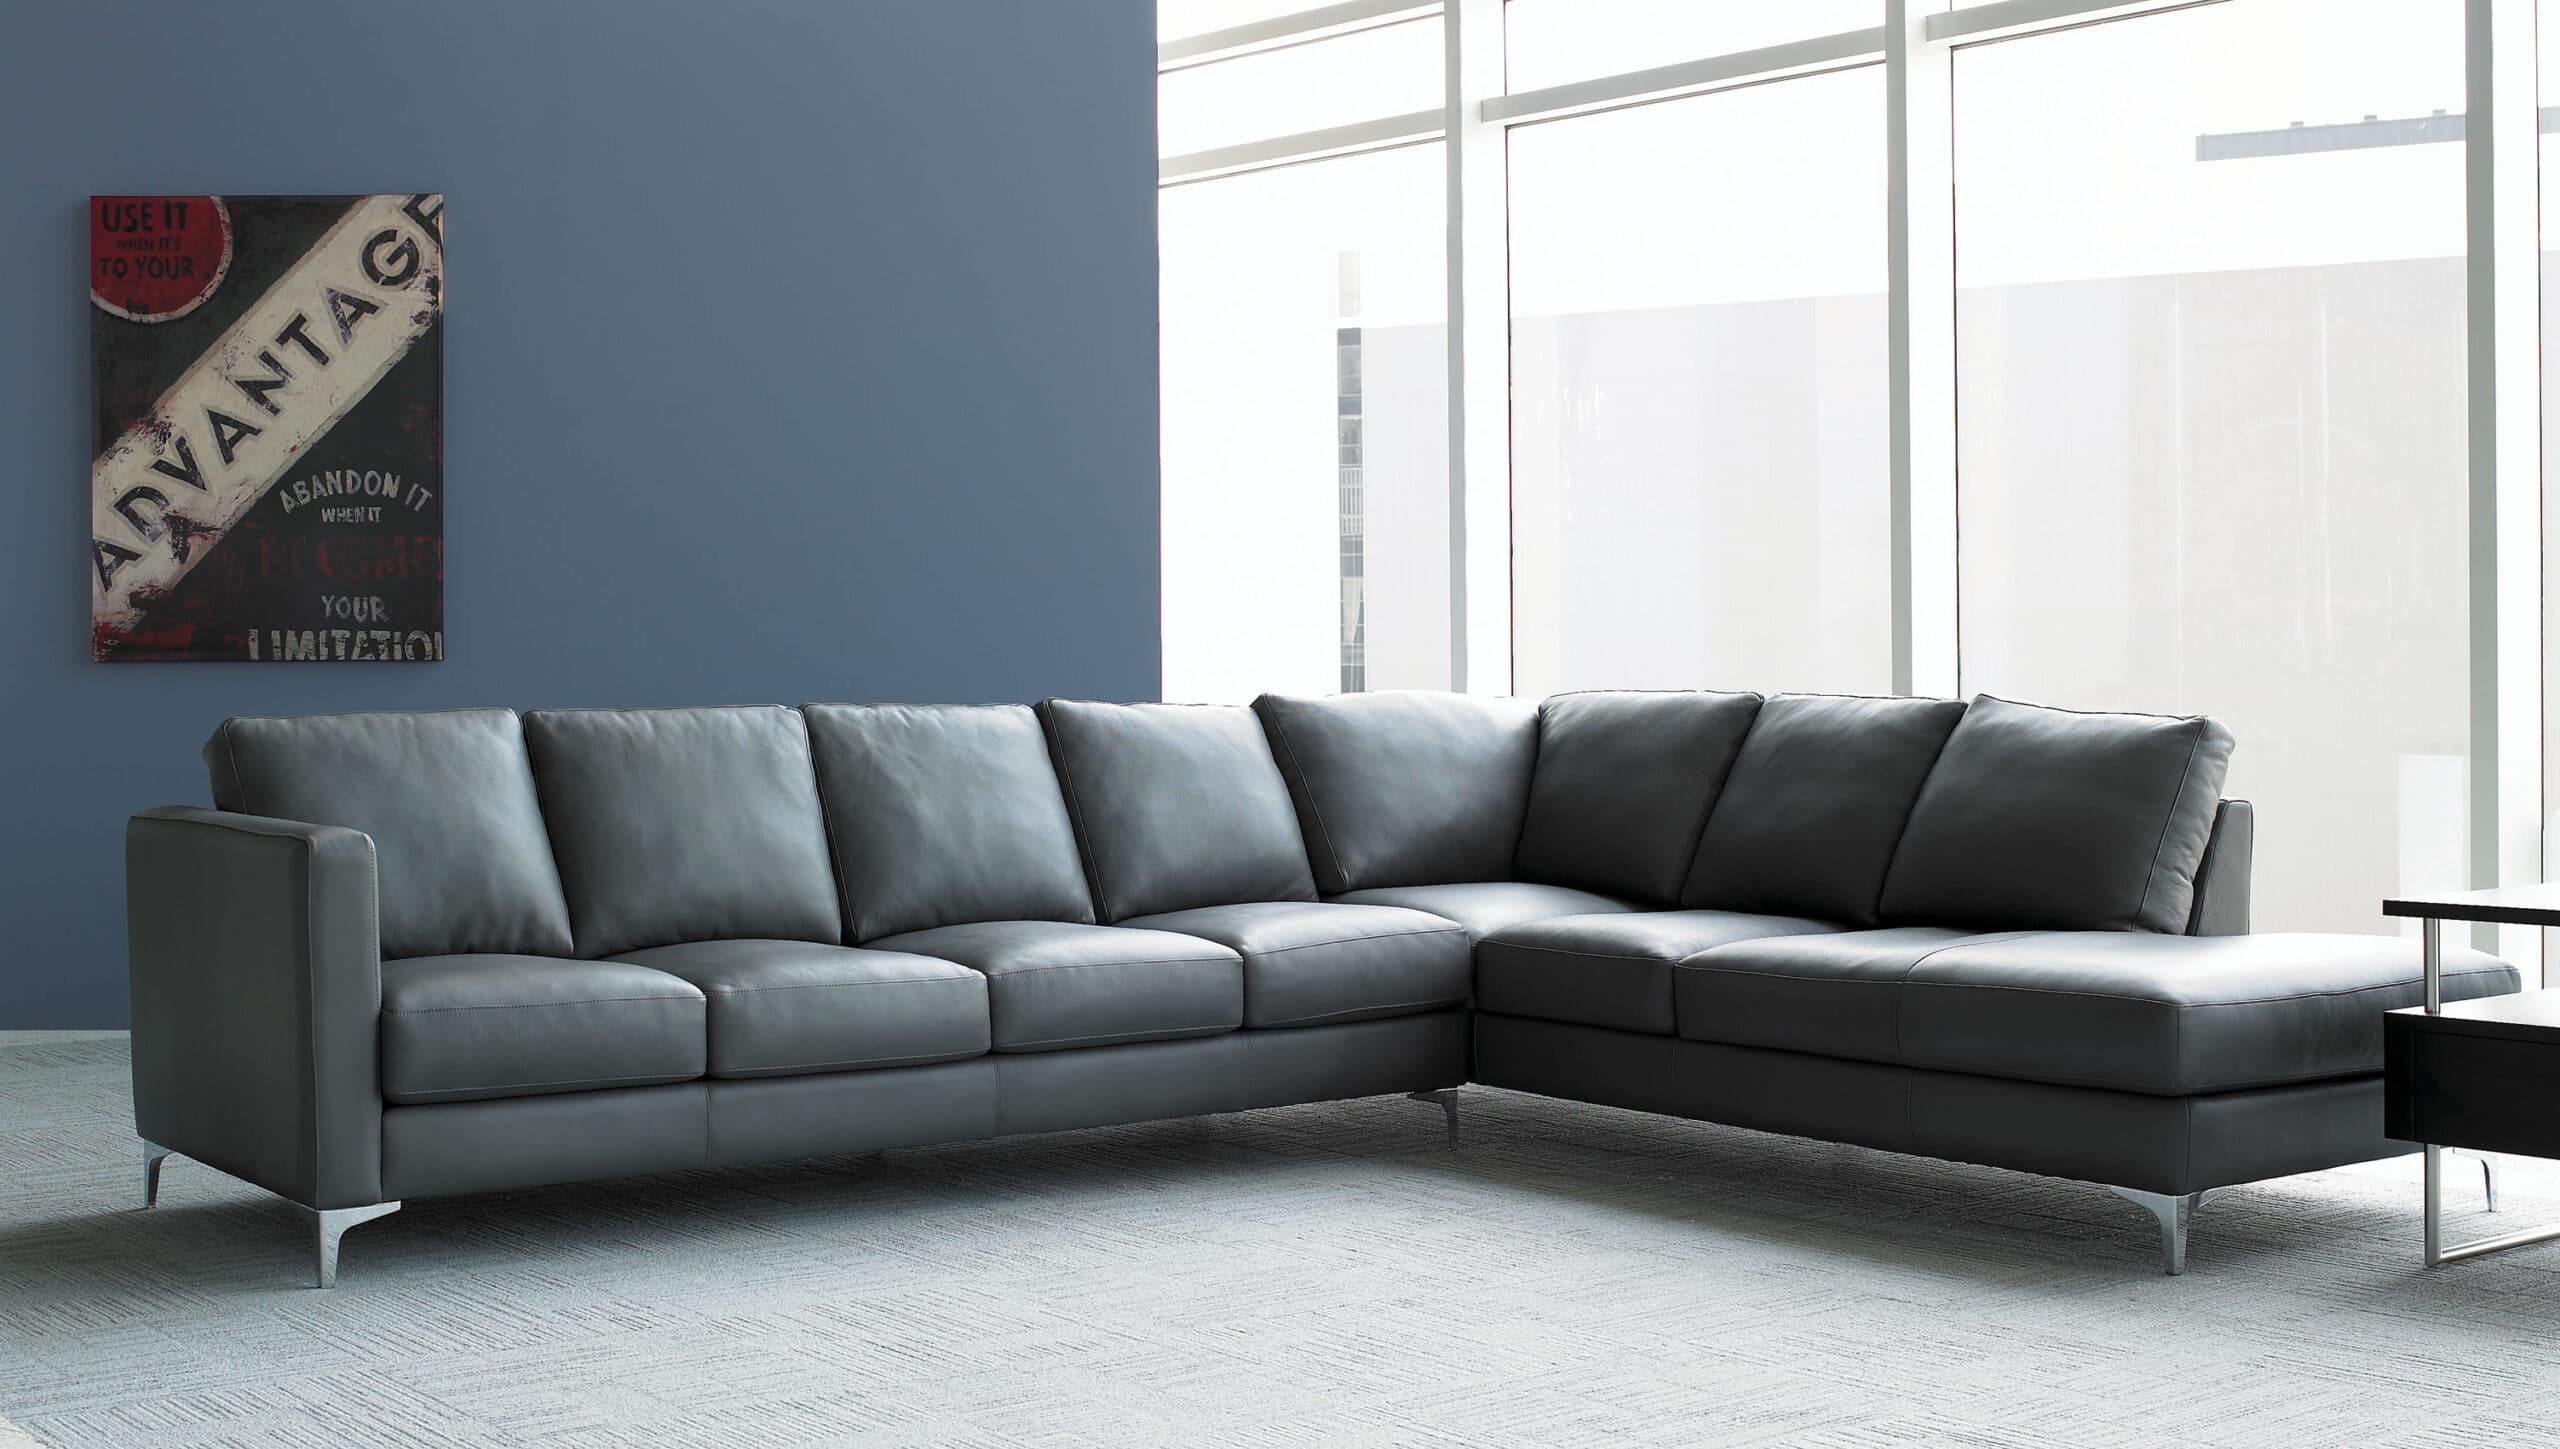 kendall sofa from american leather